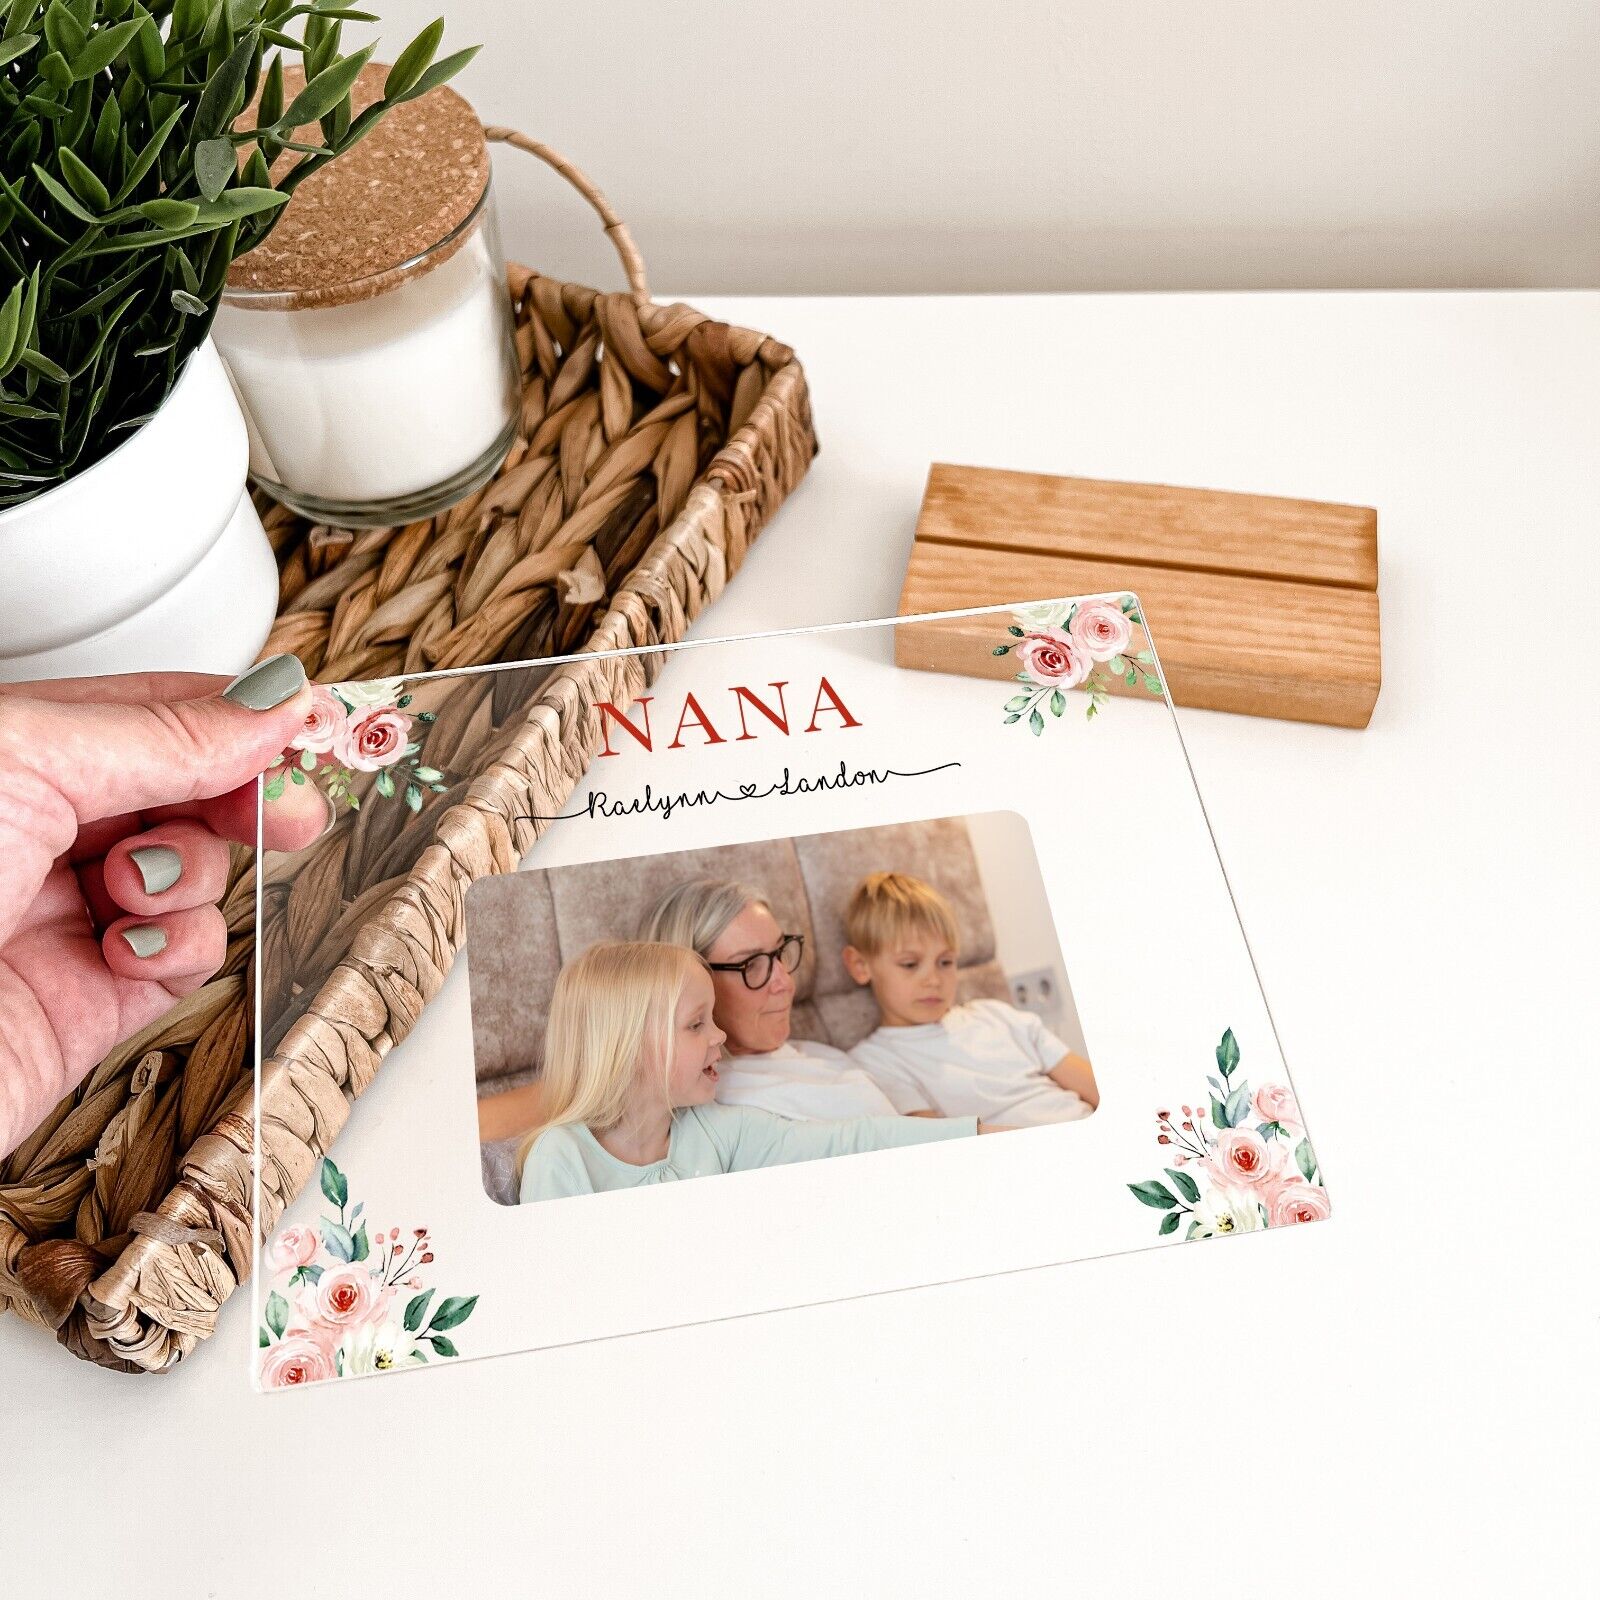 Personalized Wooden Plaque Flowers Grandma Nana Granny Mother's Day Gift